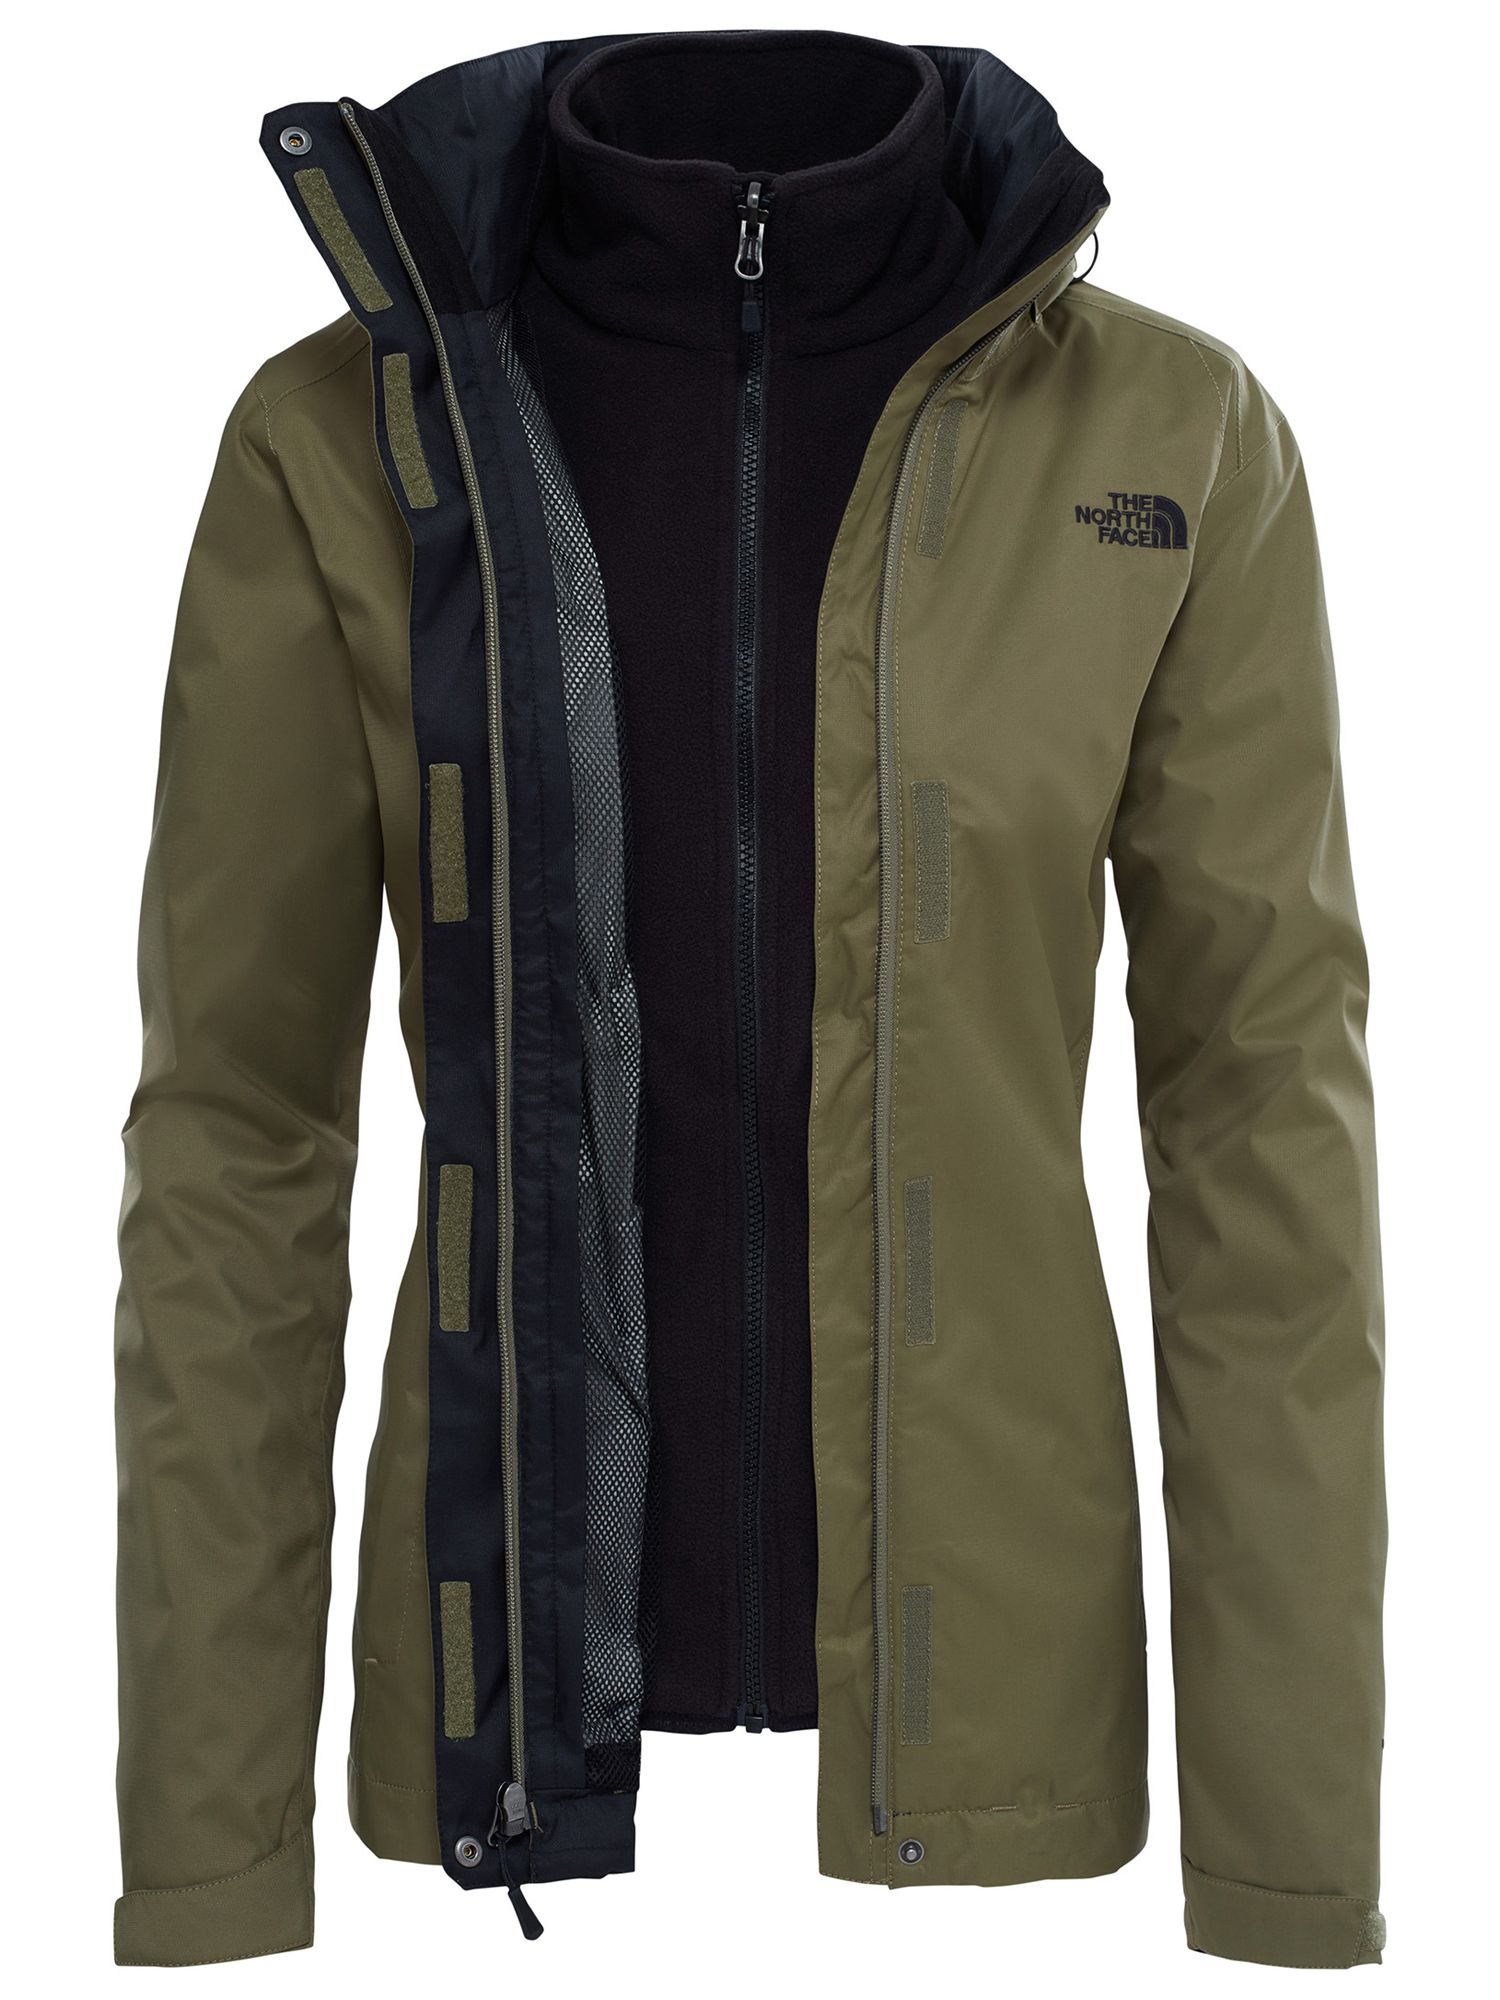 The North Face Evolve II Triclimate 3-in-1 Waterproof Women's Jacket, Olive, M